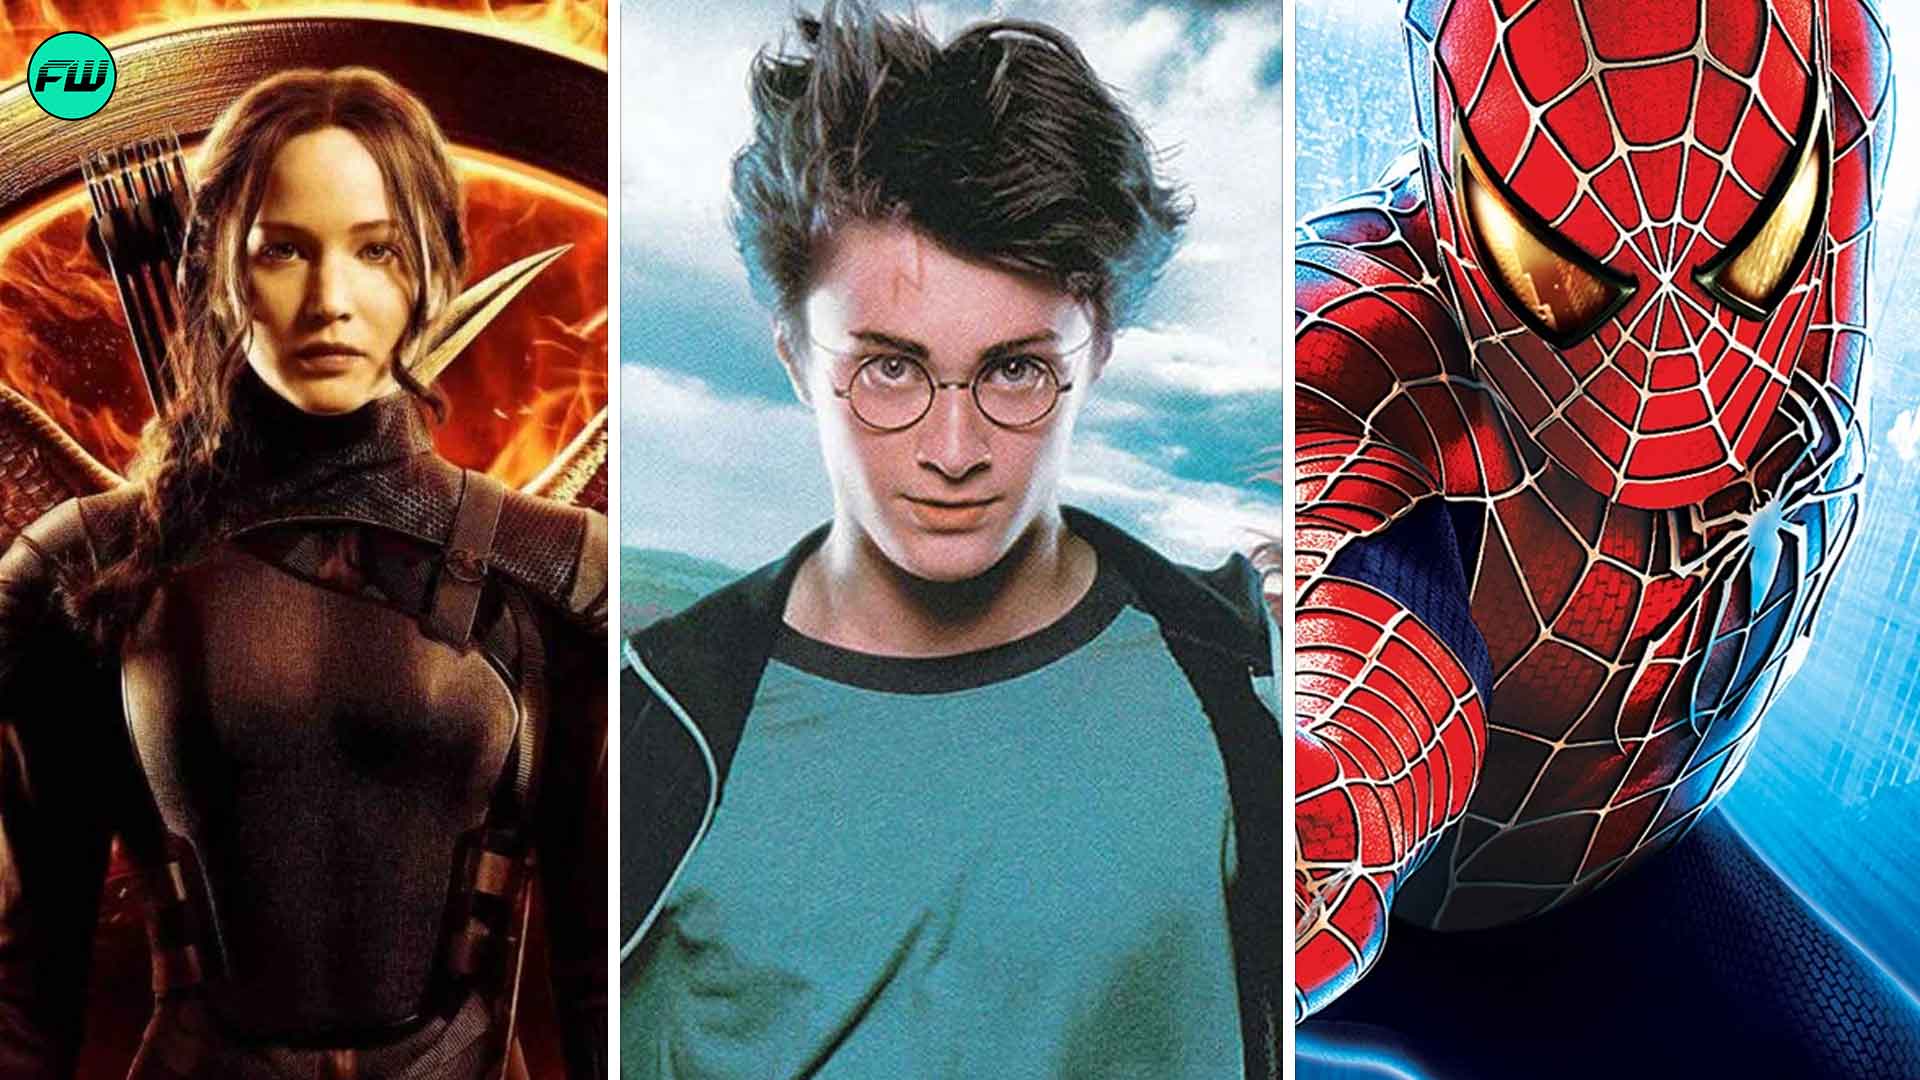 Ranking The Best Spider-Man Franchise Movies